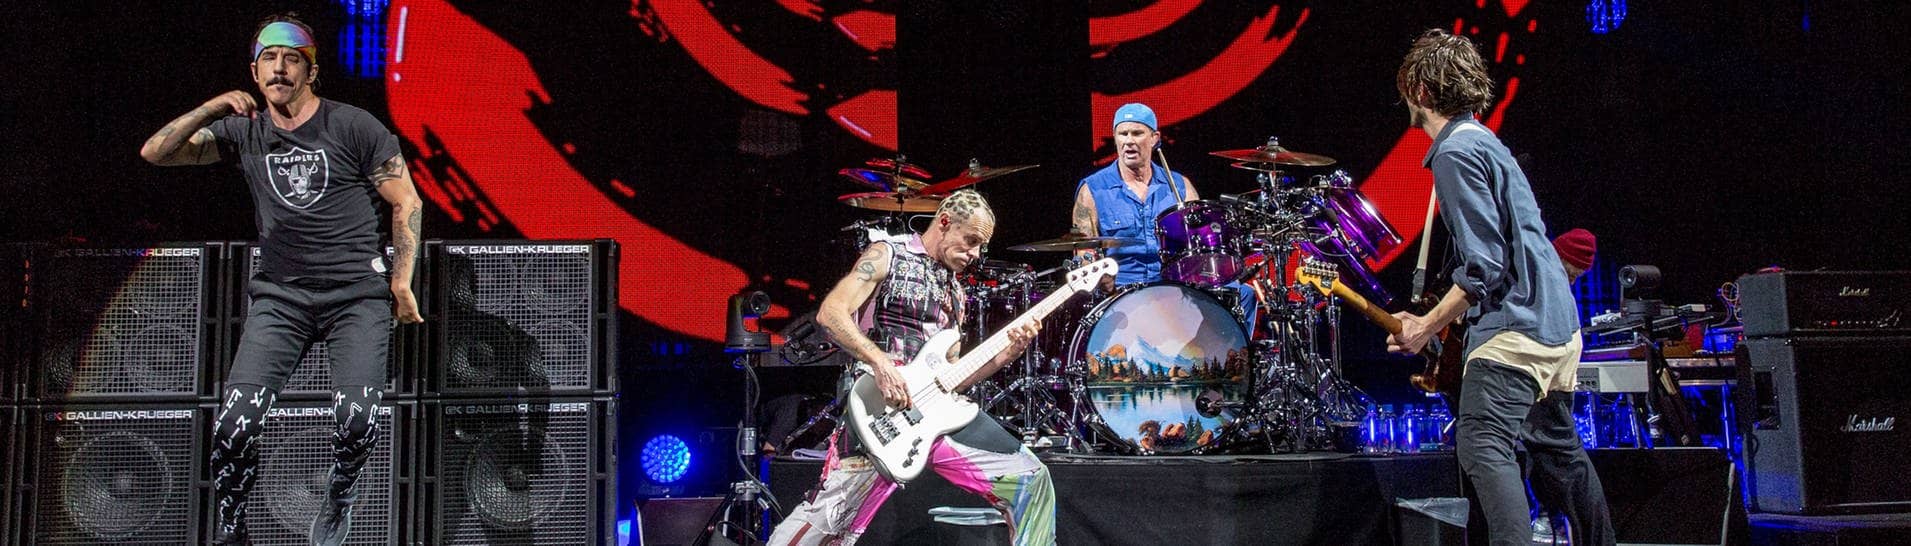 Red Hot Chili Peppers live 2019 Pyramiden Gizeh Ägypten (Foto: picture-alliance / Reportdienste, Picture Alliance)